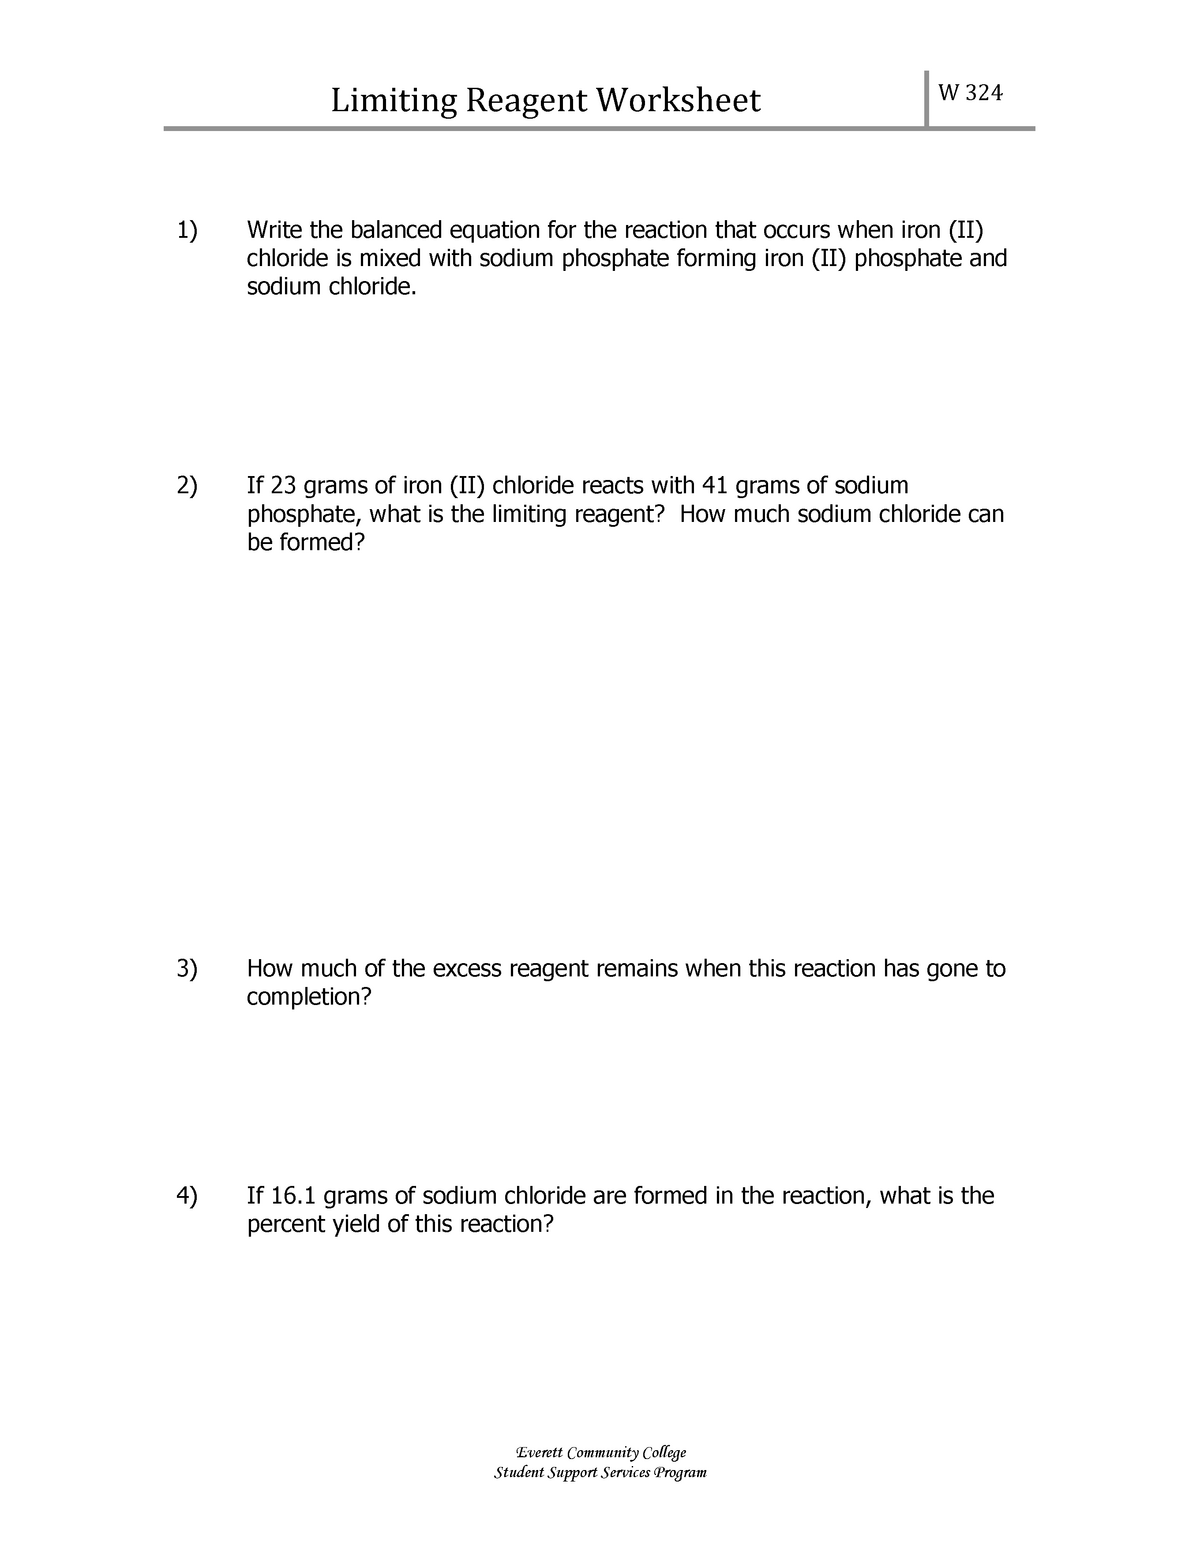 W21 limiting reagent worksheet - Limiting Reagent Worksheet W 21 Within Limiting Reactant Worksheet Answers